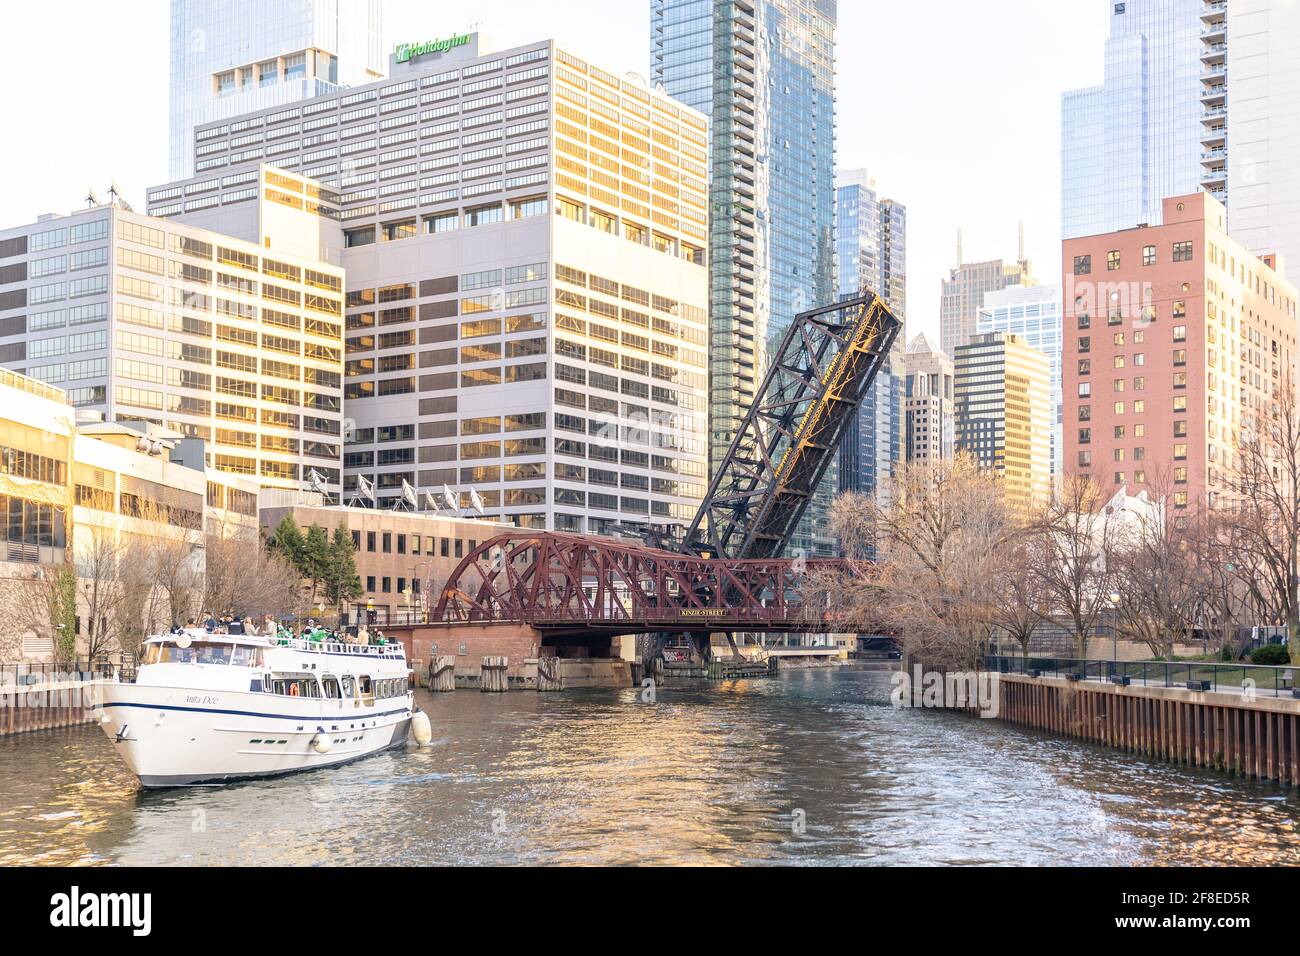 Chicago, Illinois - March 13, 2021:Panoramic Image of Kinzie Street's Drawbridge Taken from the Chicago River with the Chicago Skyline. Stock Photo